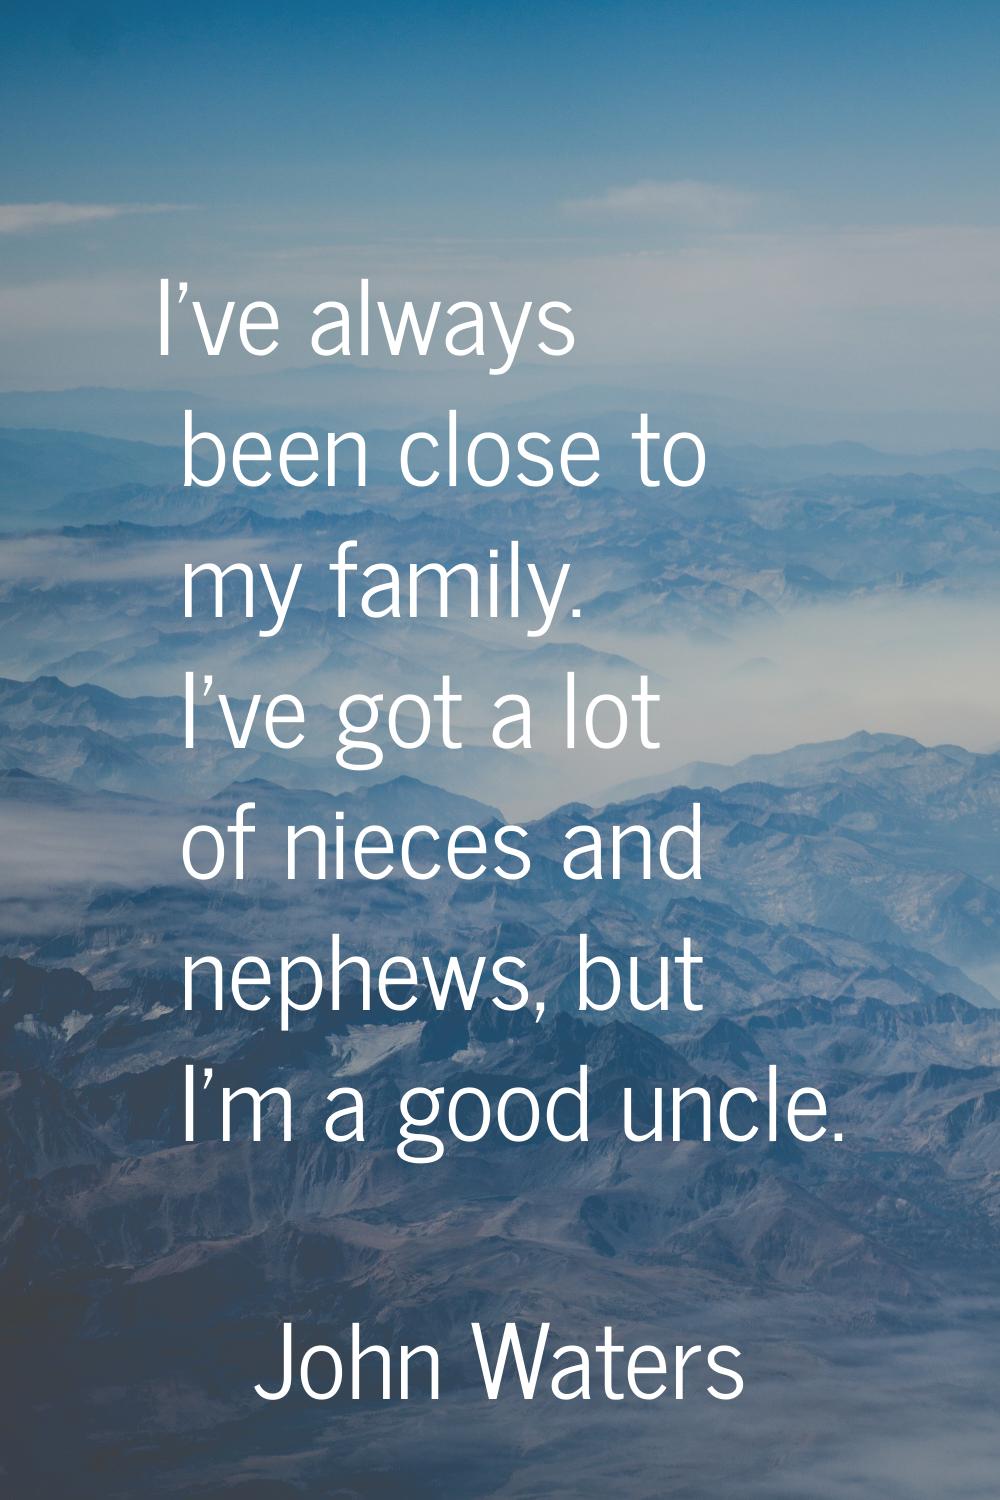 I've always been close to my family. I've got a lot of nieces and nephews, but I'm a good uncle.